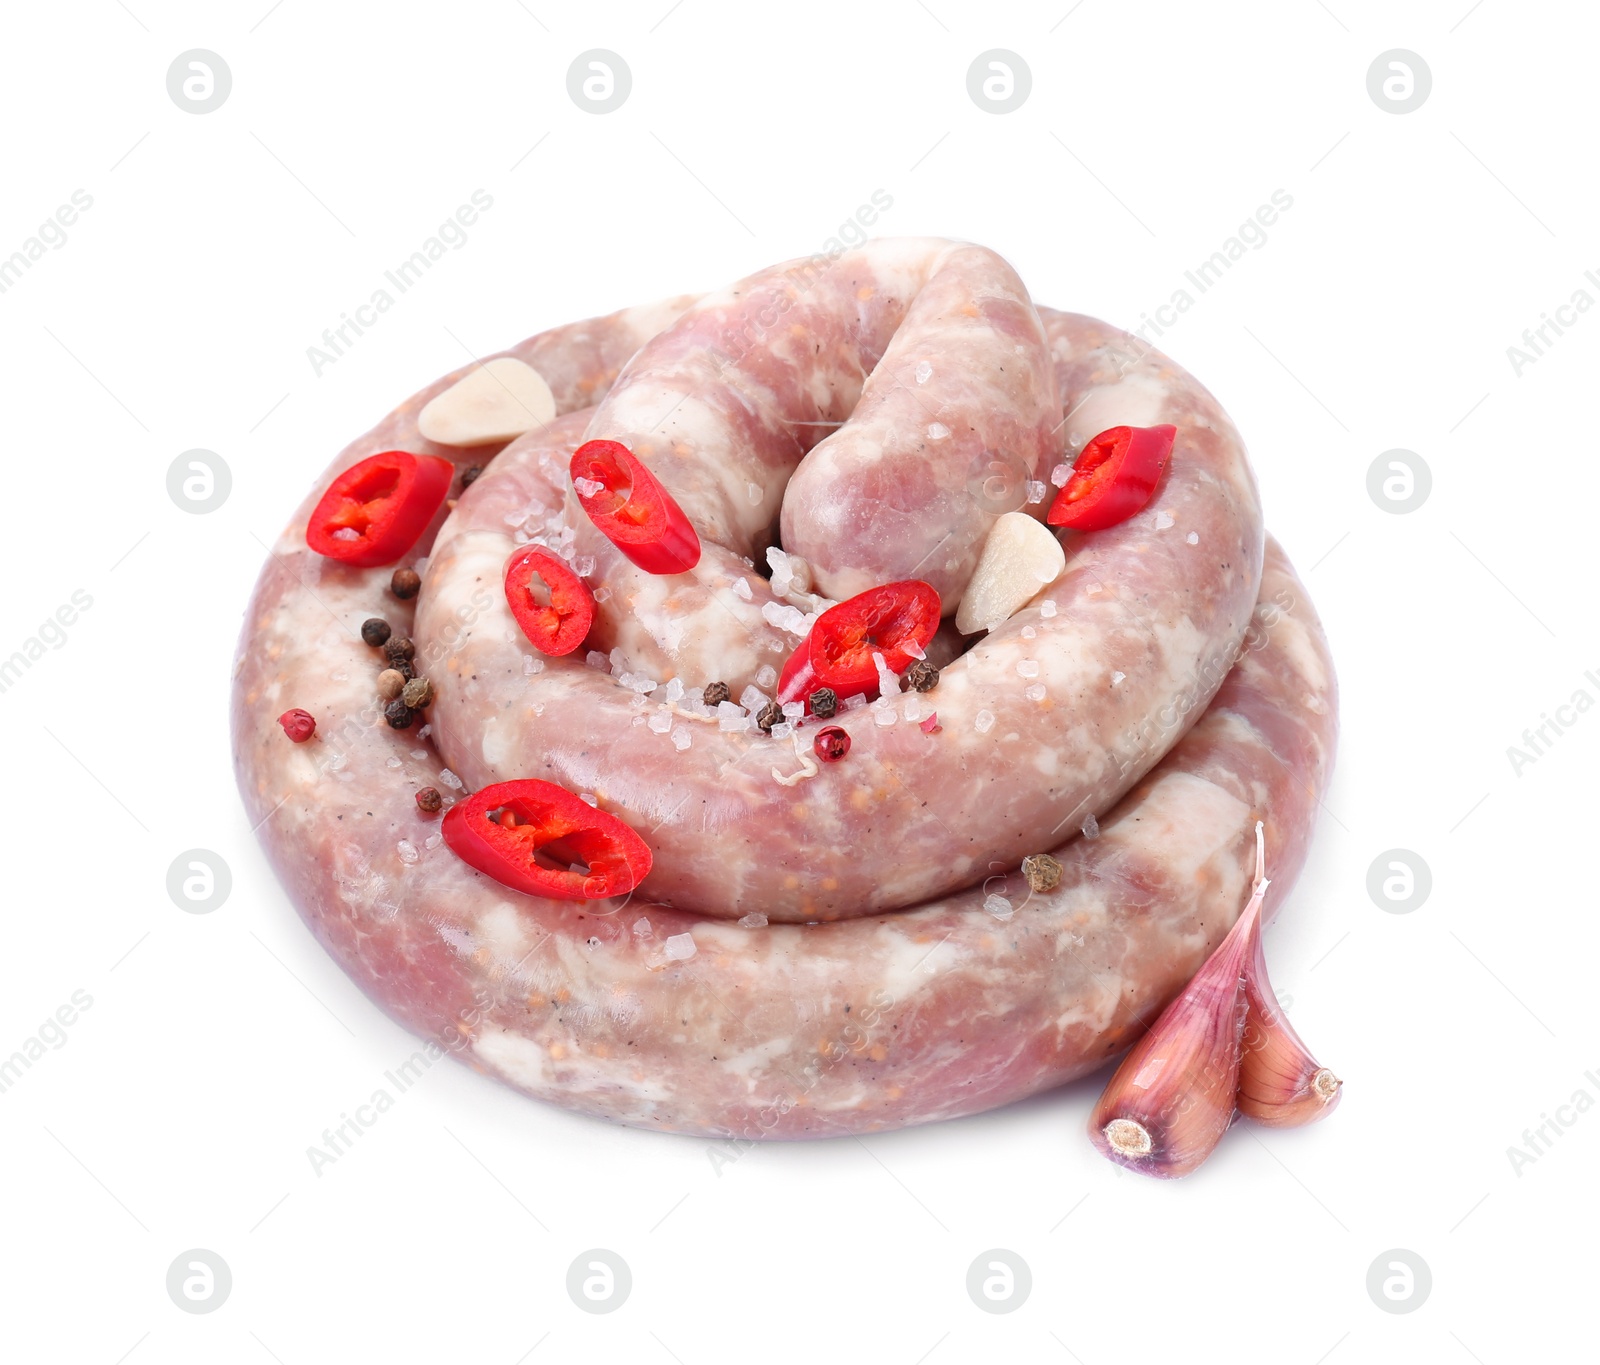 Photo of Homemade sausage, garlic, chili and spices isolated on white